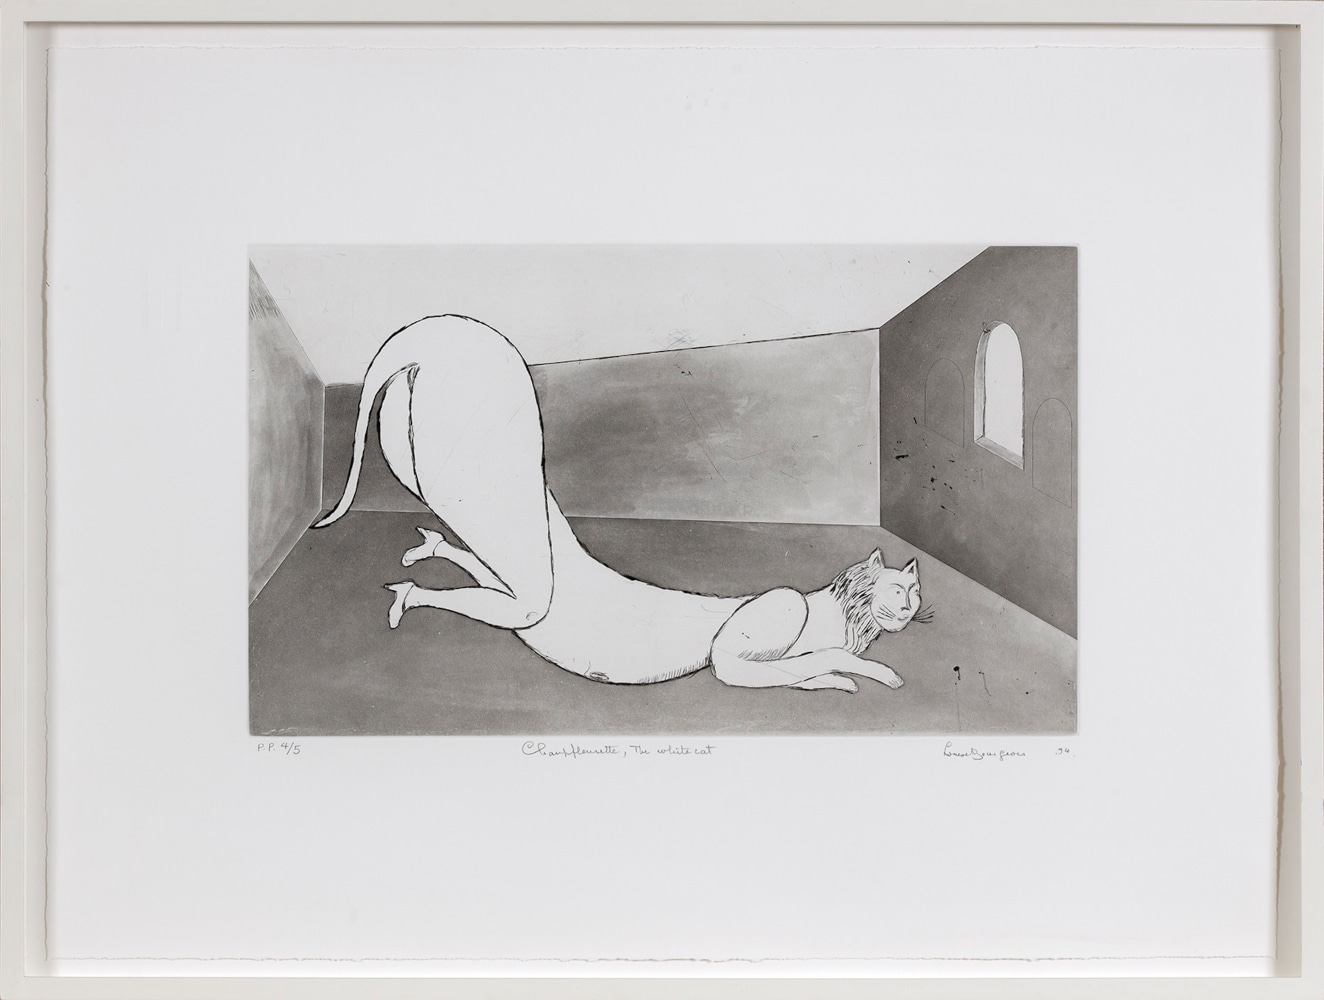 Champfleurette the White Cat, 1994

drypoint, etching and aquatint, edition of 22 + 10 AP + 5 PP

18 1/2 x 25 in. / 47 x 63.5 cm